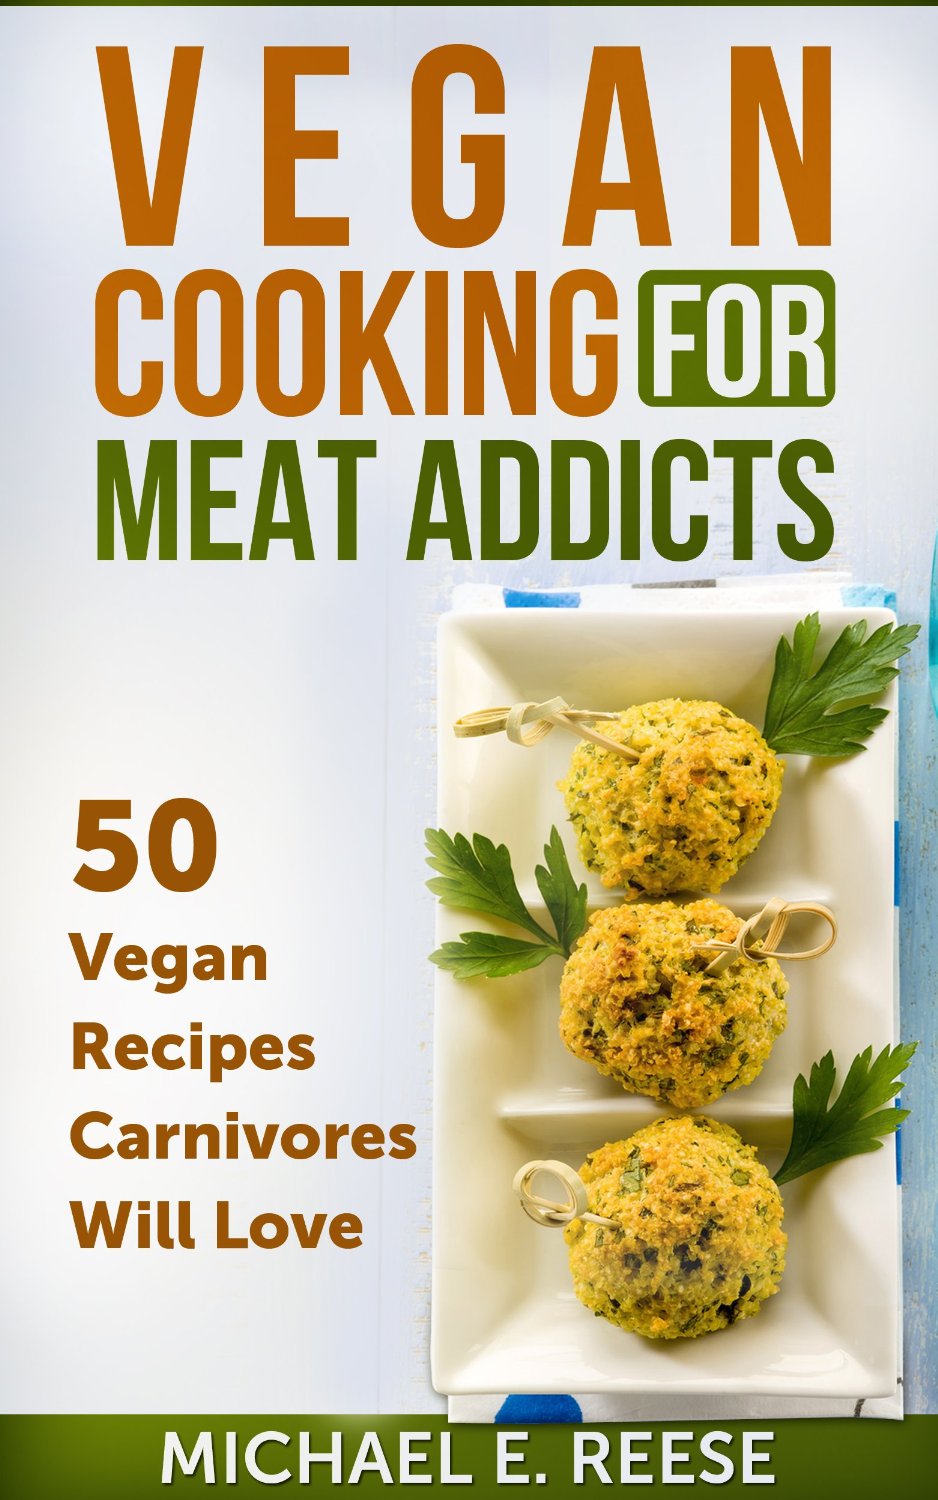 Vegan Cooking For Meat Addicts: 50 Vegan Recipes Carnivores Will Love by Michael E. Reese